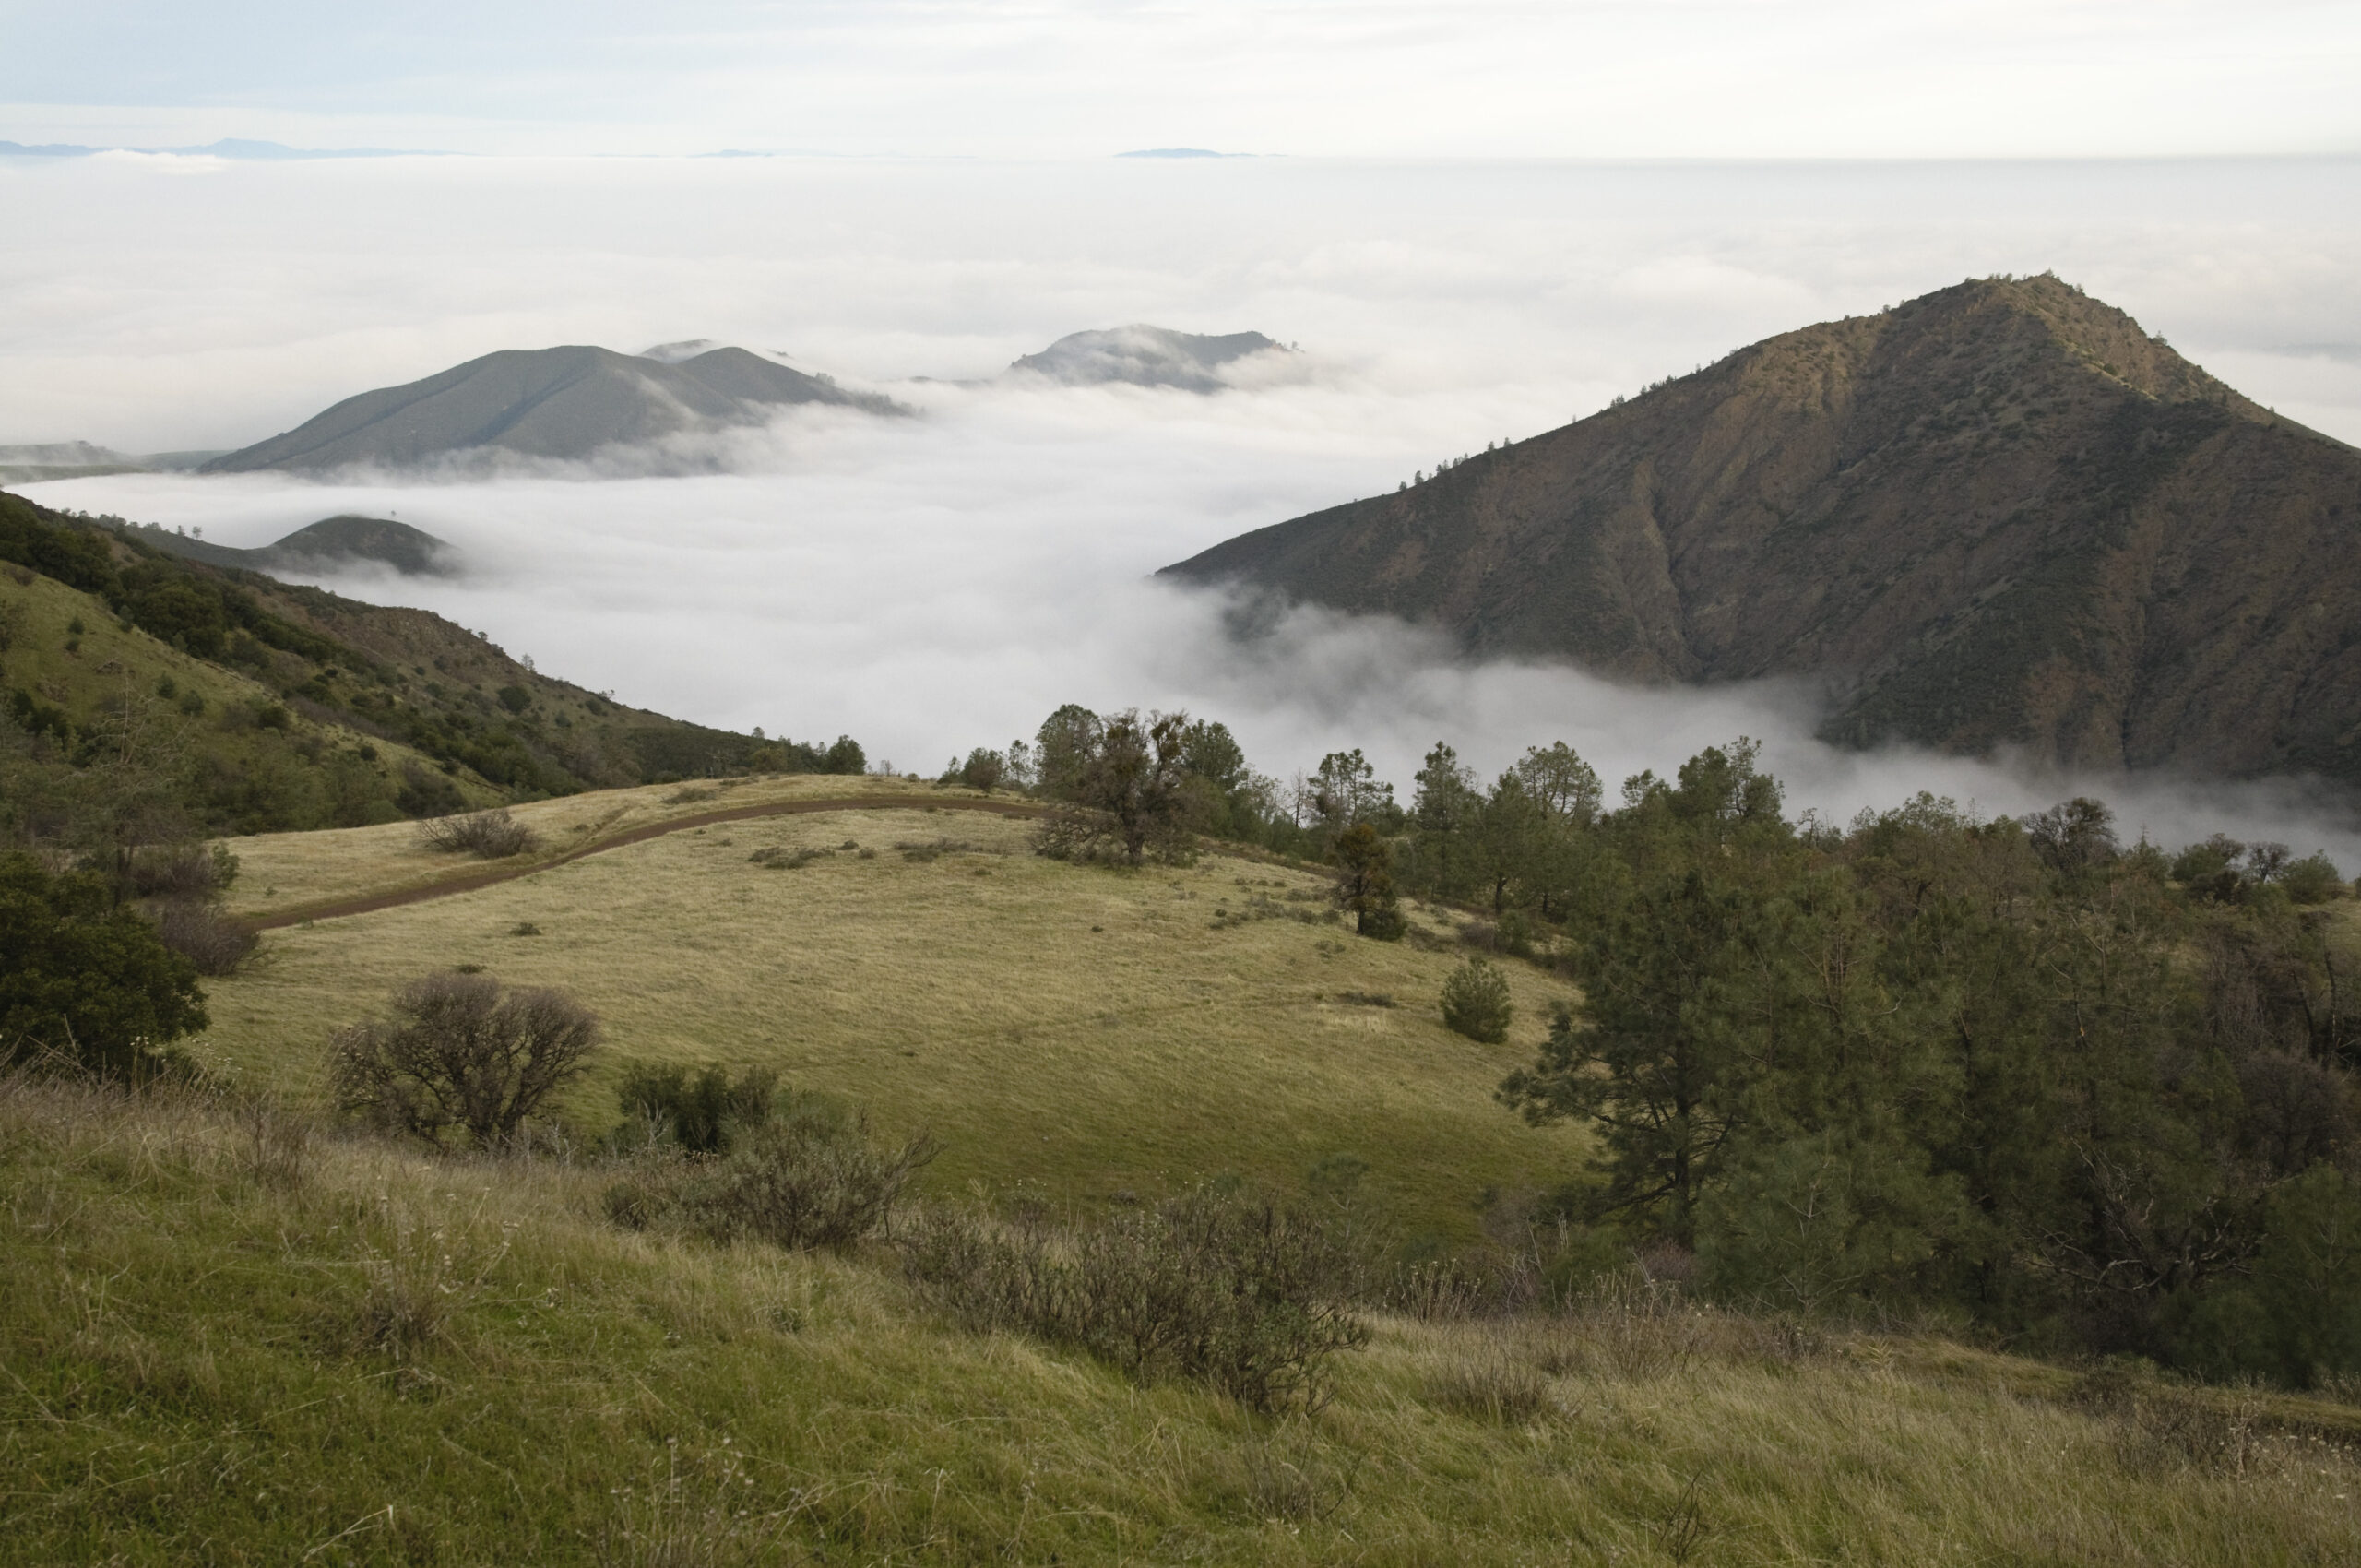 Fog blankets the area below the green and open area of Deer Flat.